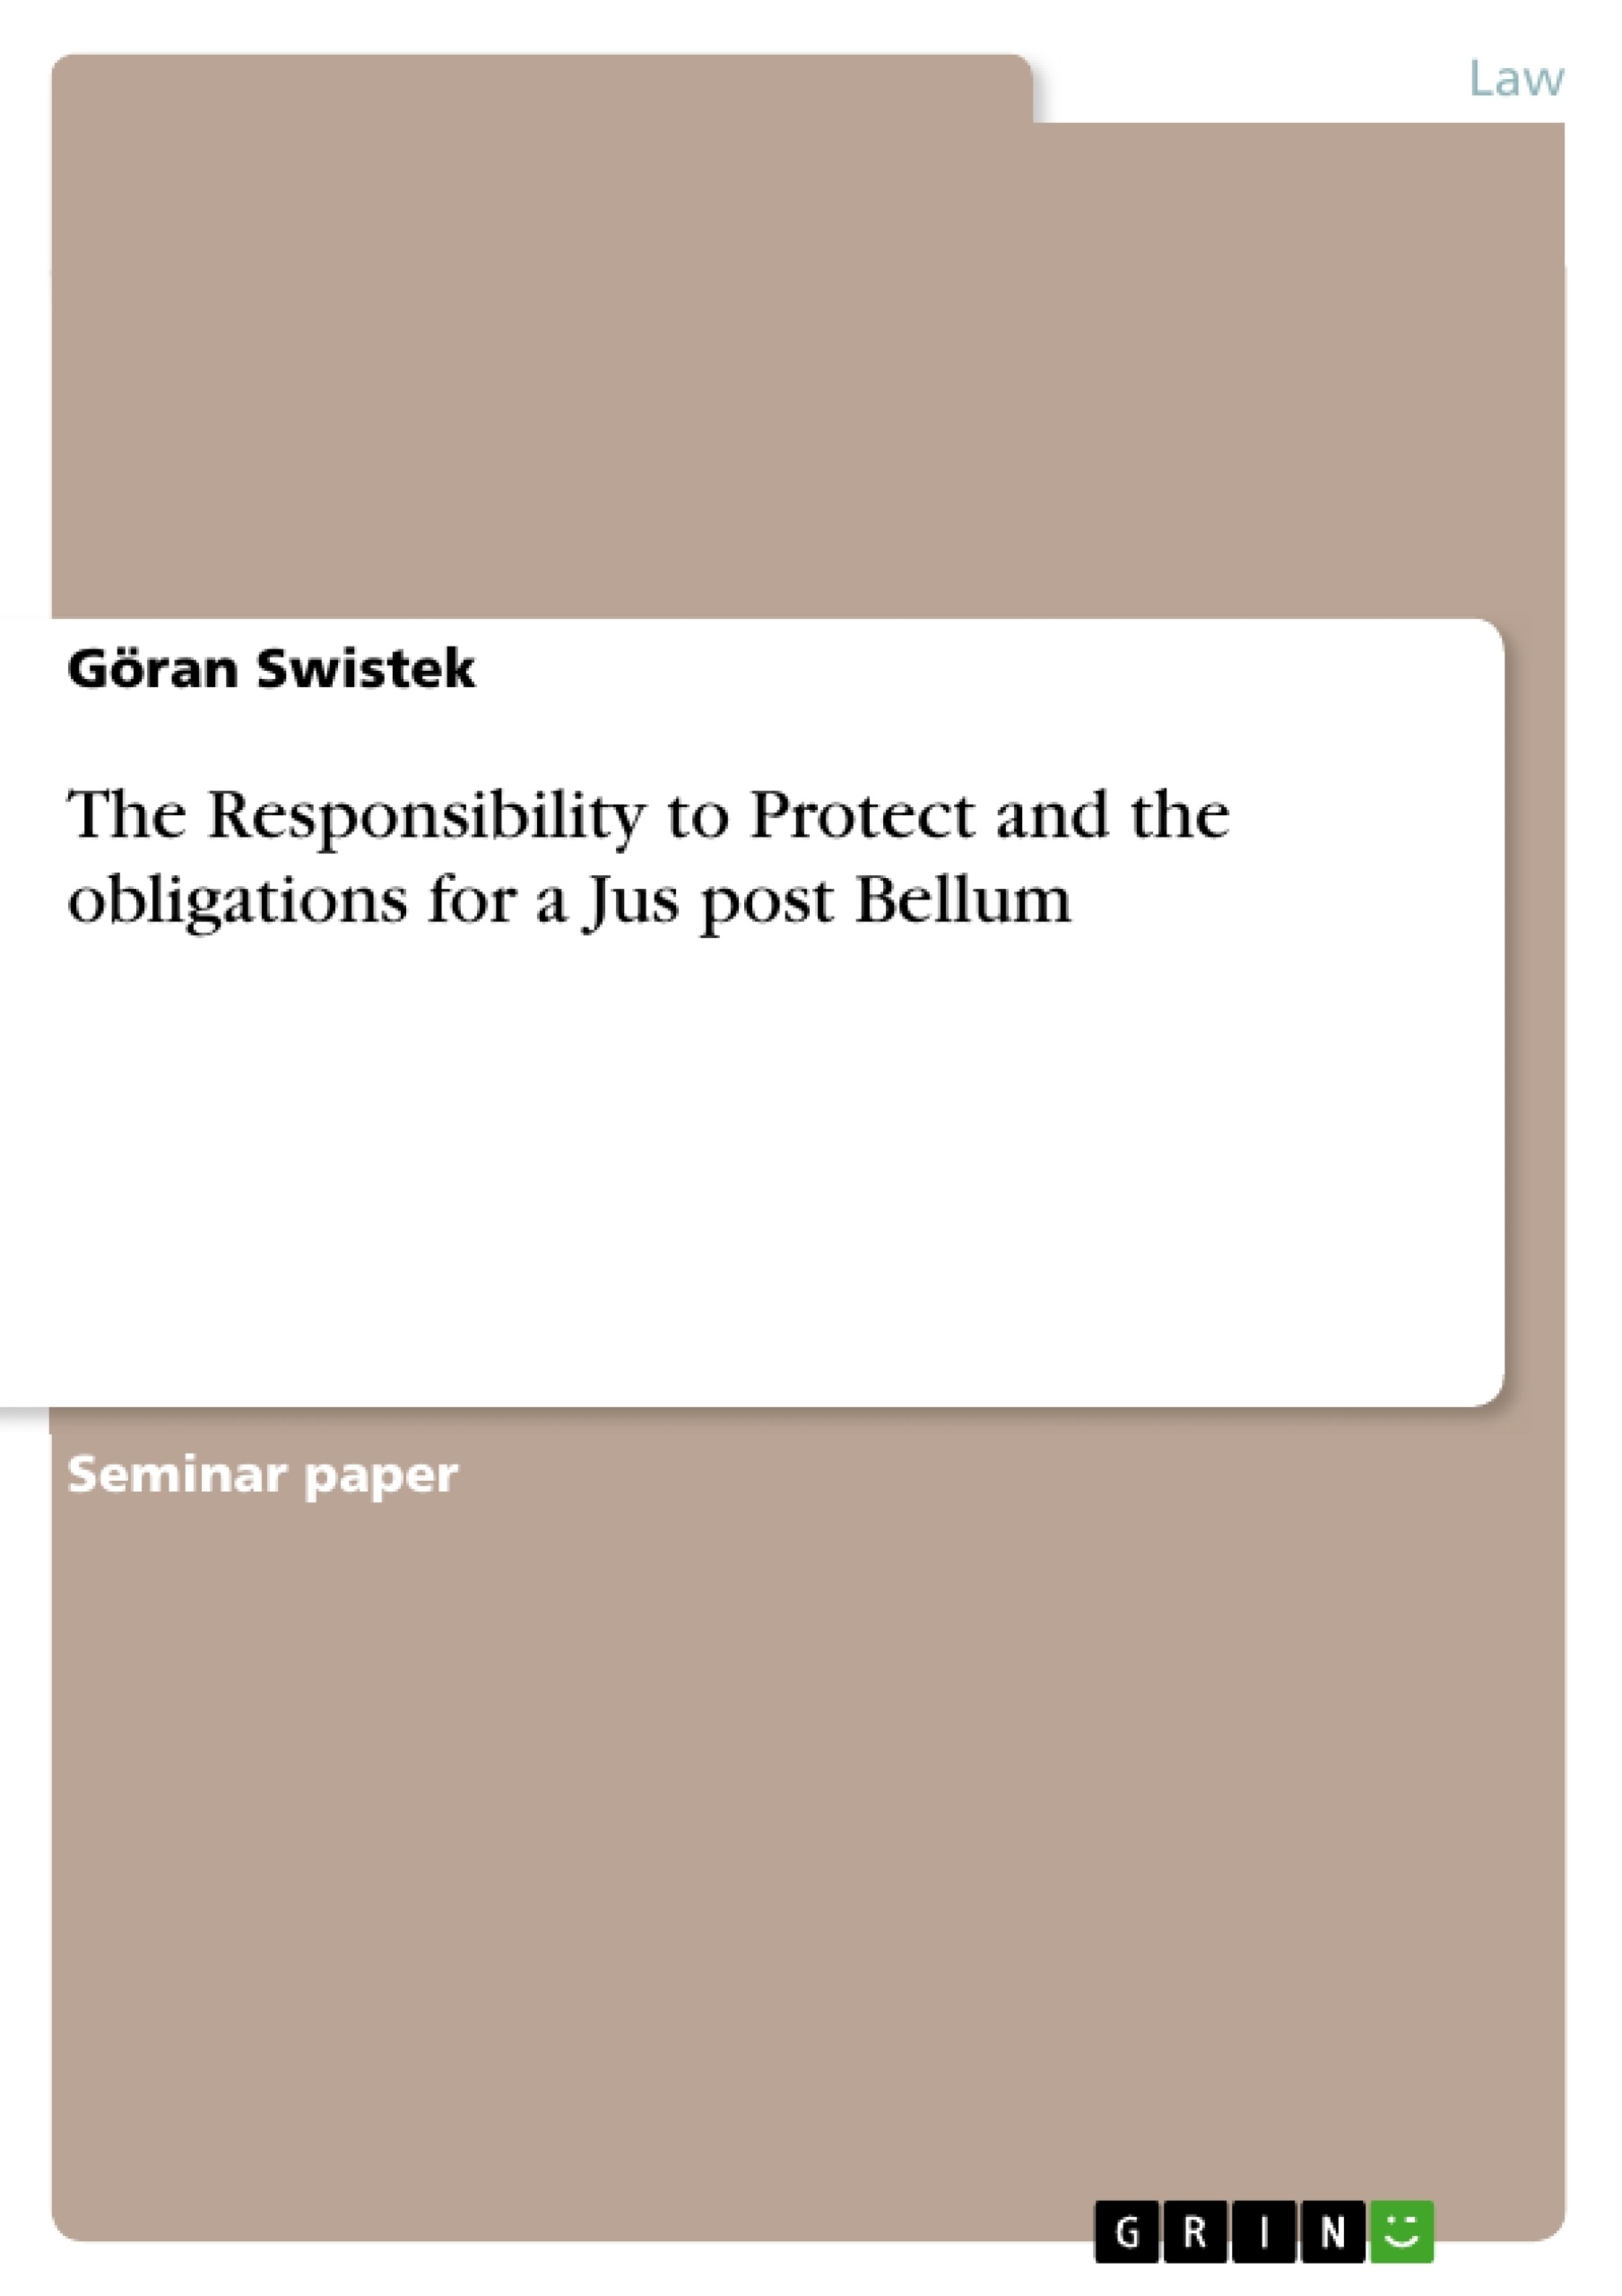 Titre: The Responsibility to Protect and the obligations for a Jus post Bellum